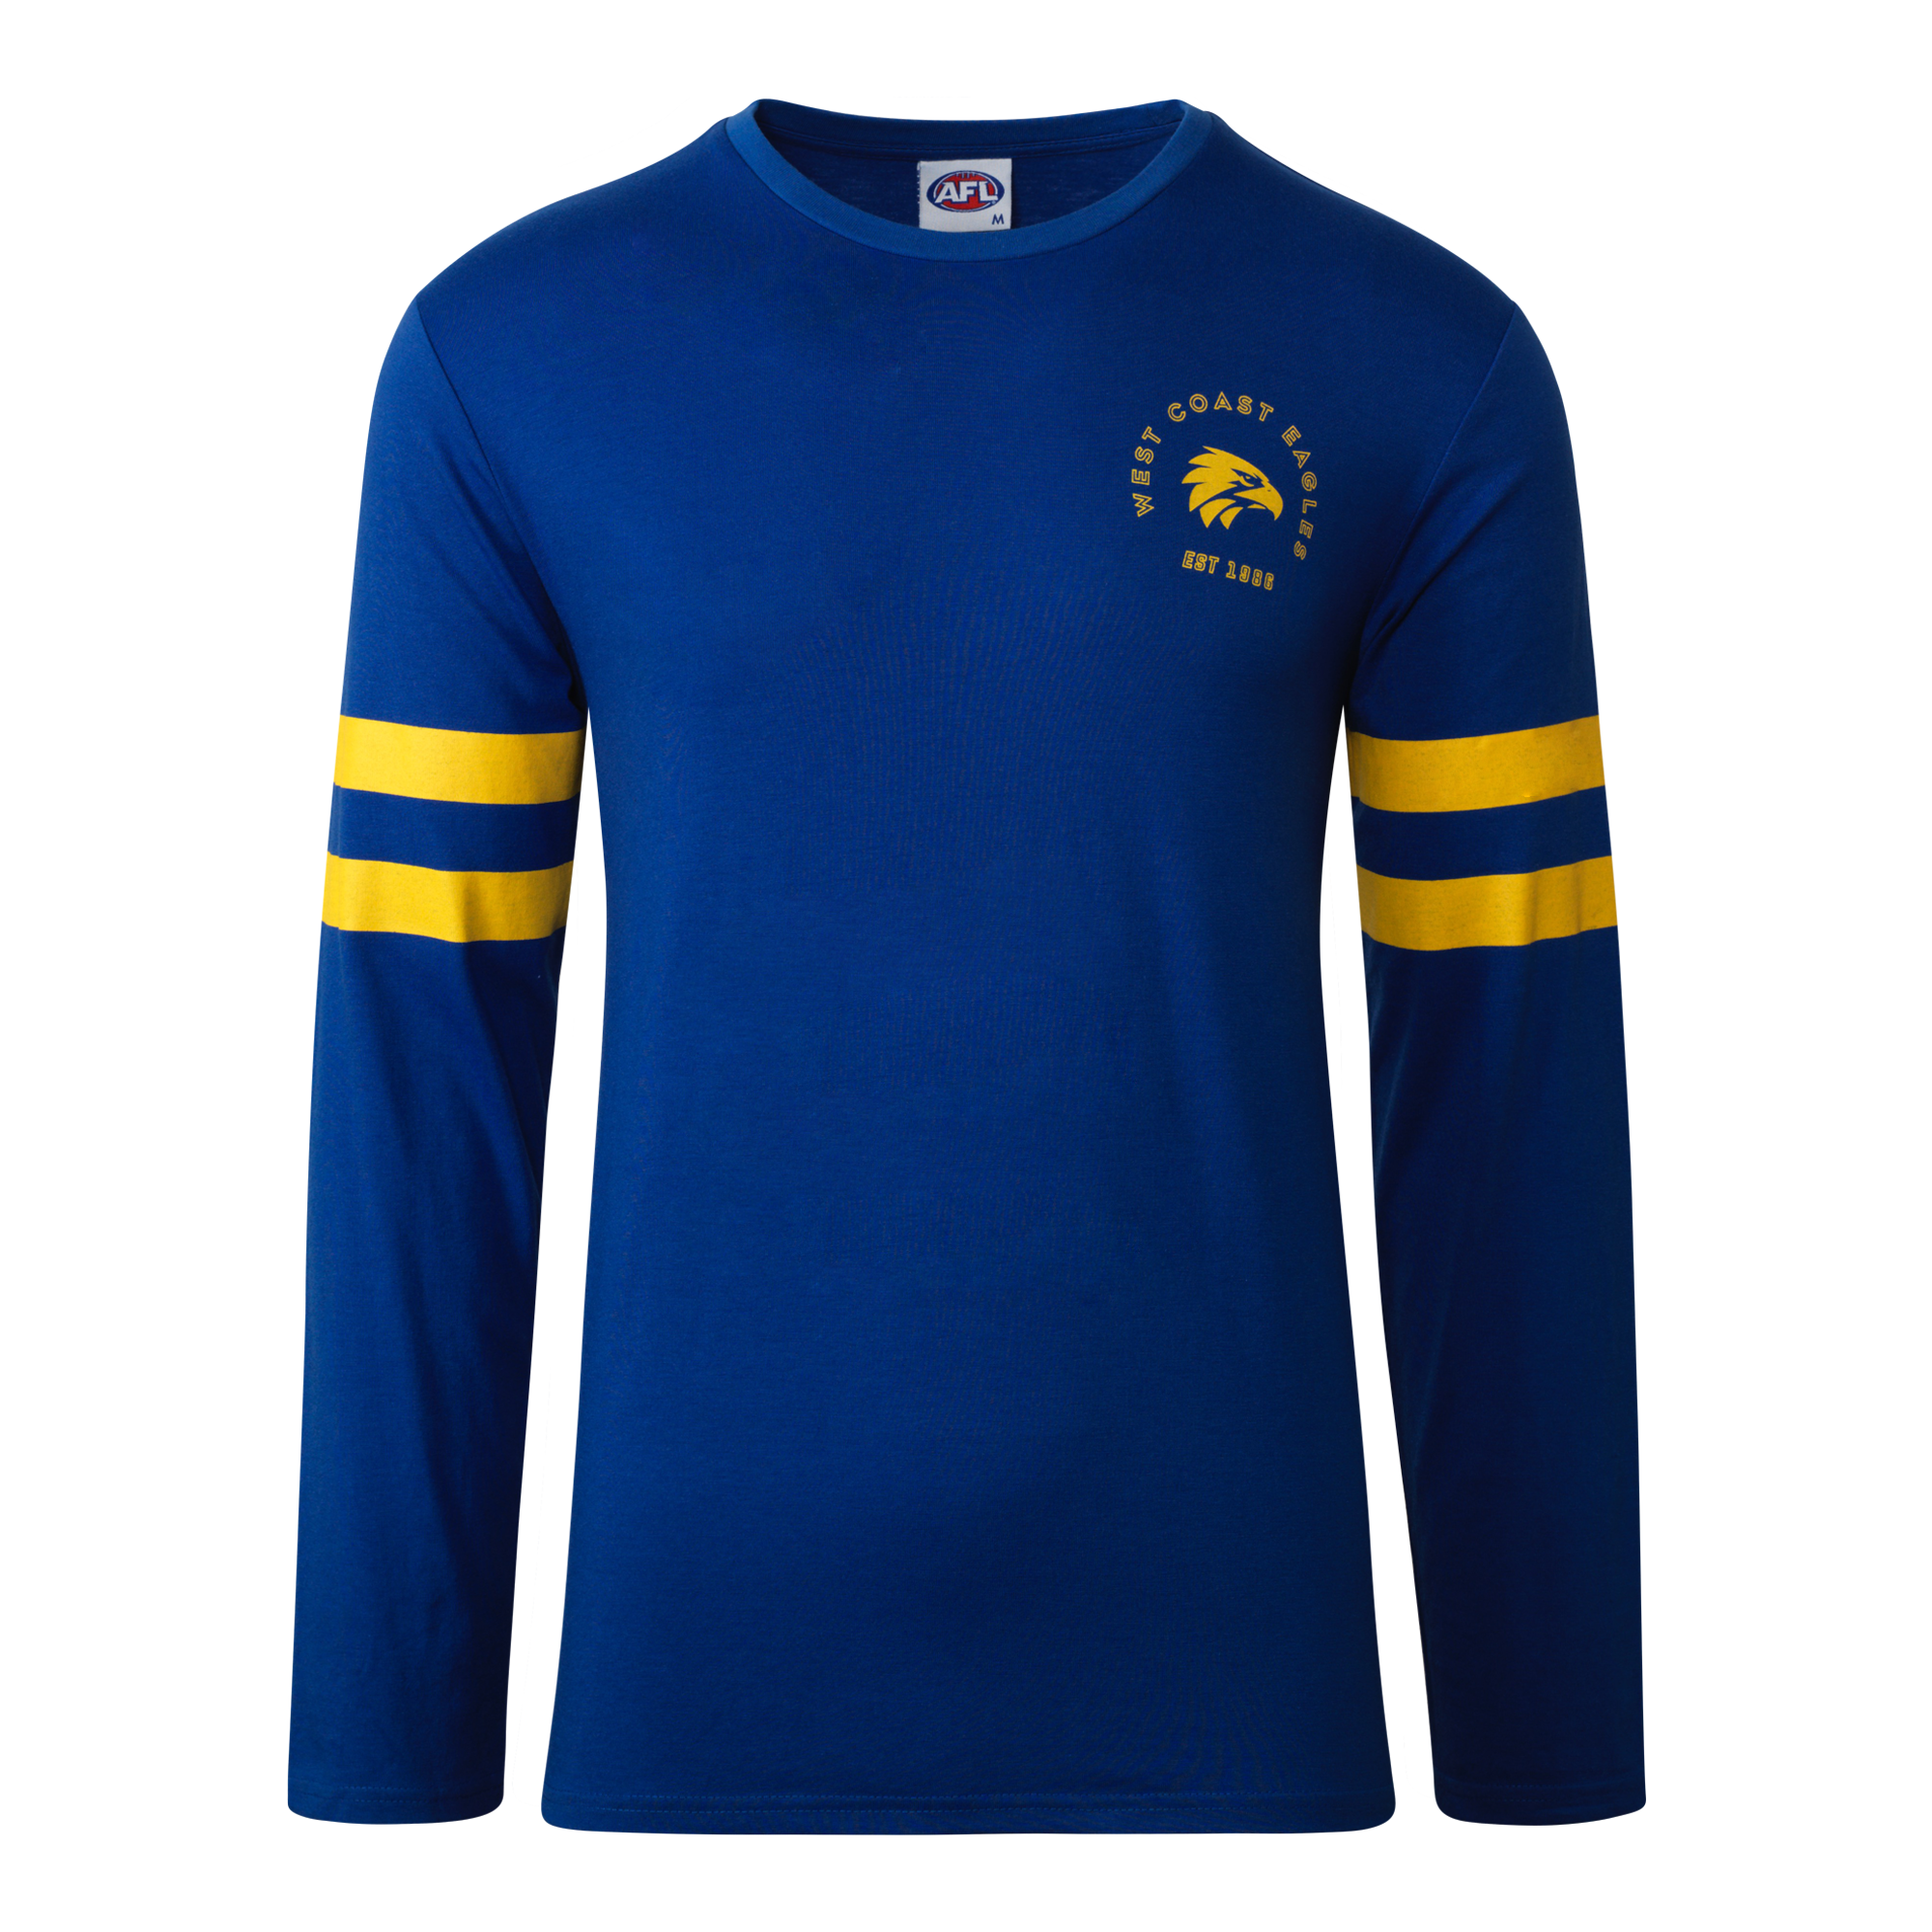 West Coast Eagles Supporter Long Sleeve T-Shirt